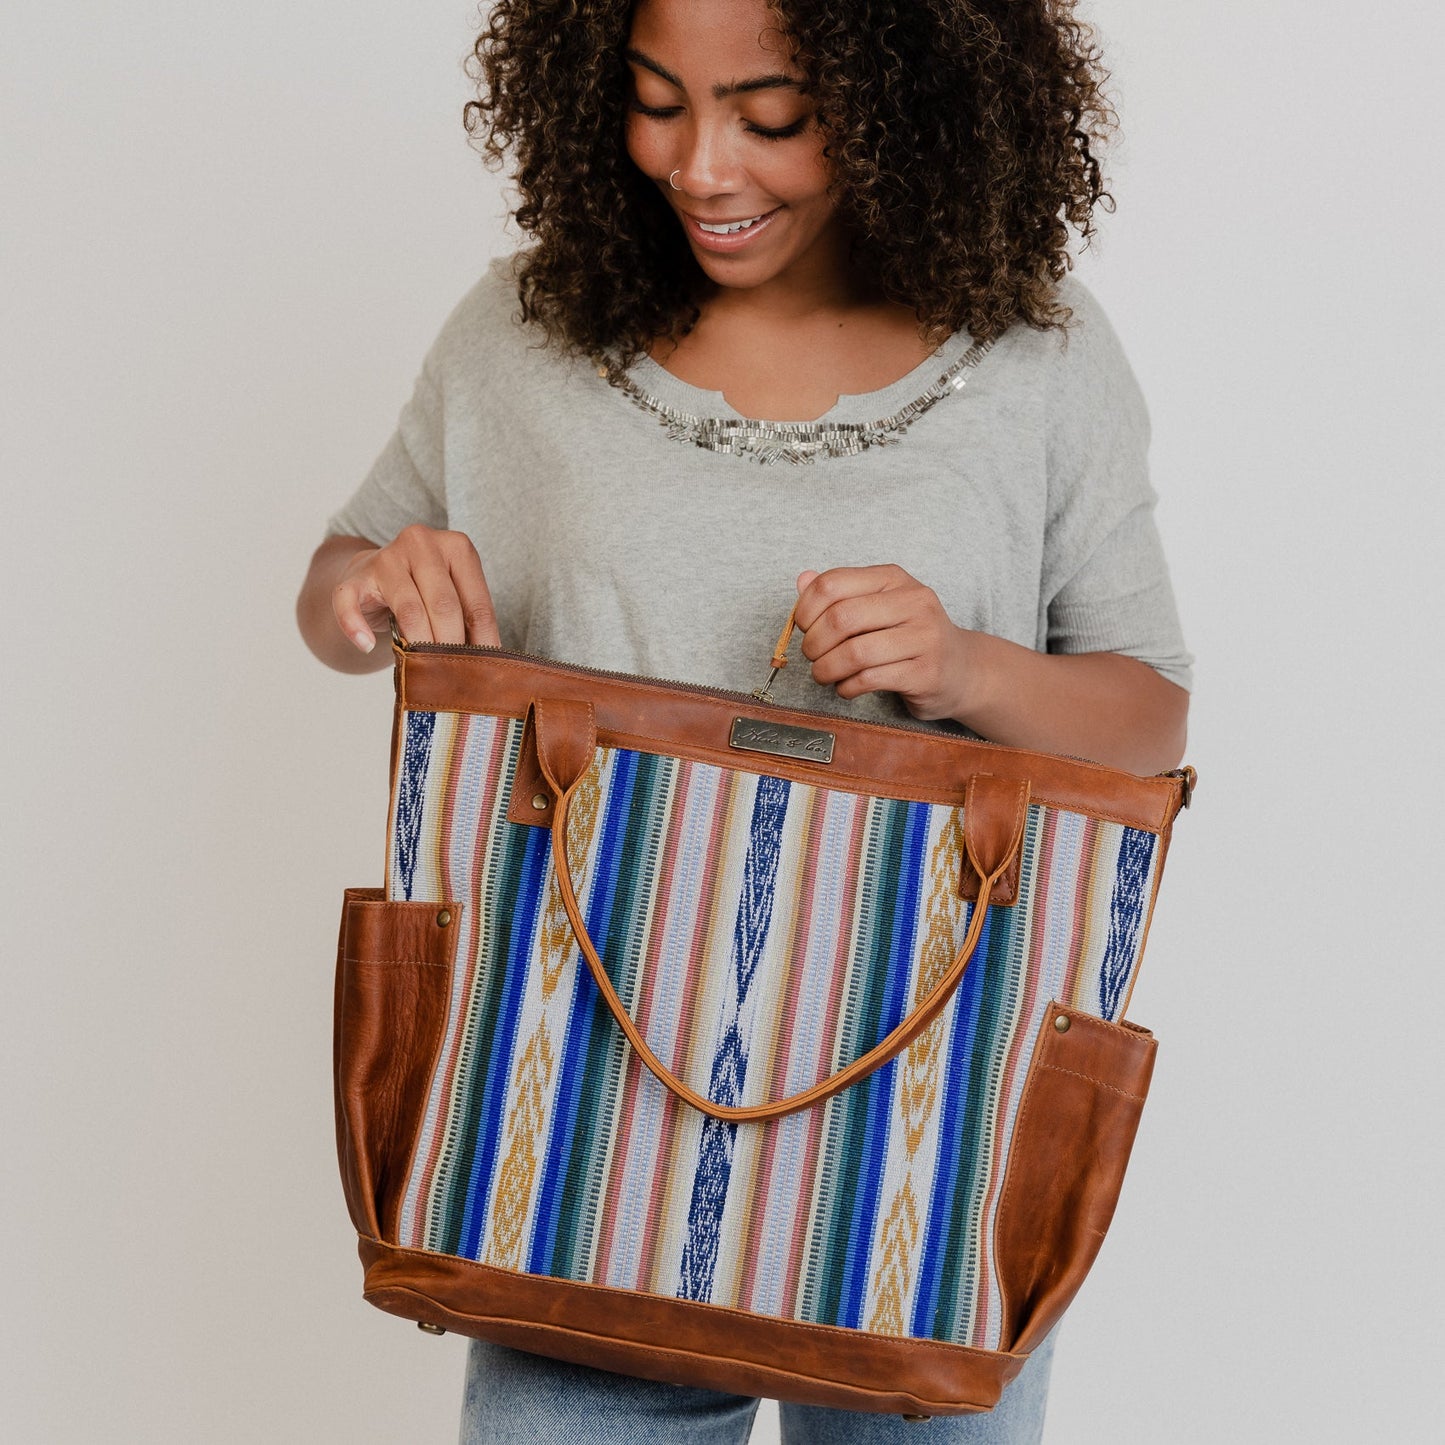 THE PERFECT BAG FULL - ARTISAN COLLECTION - DUNA AZUL - CAFE LEATHER